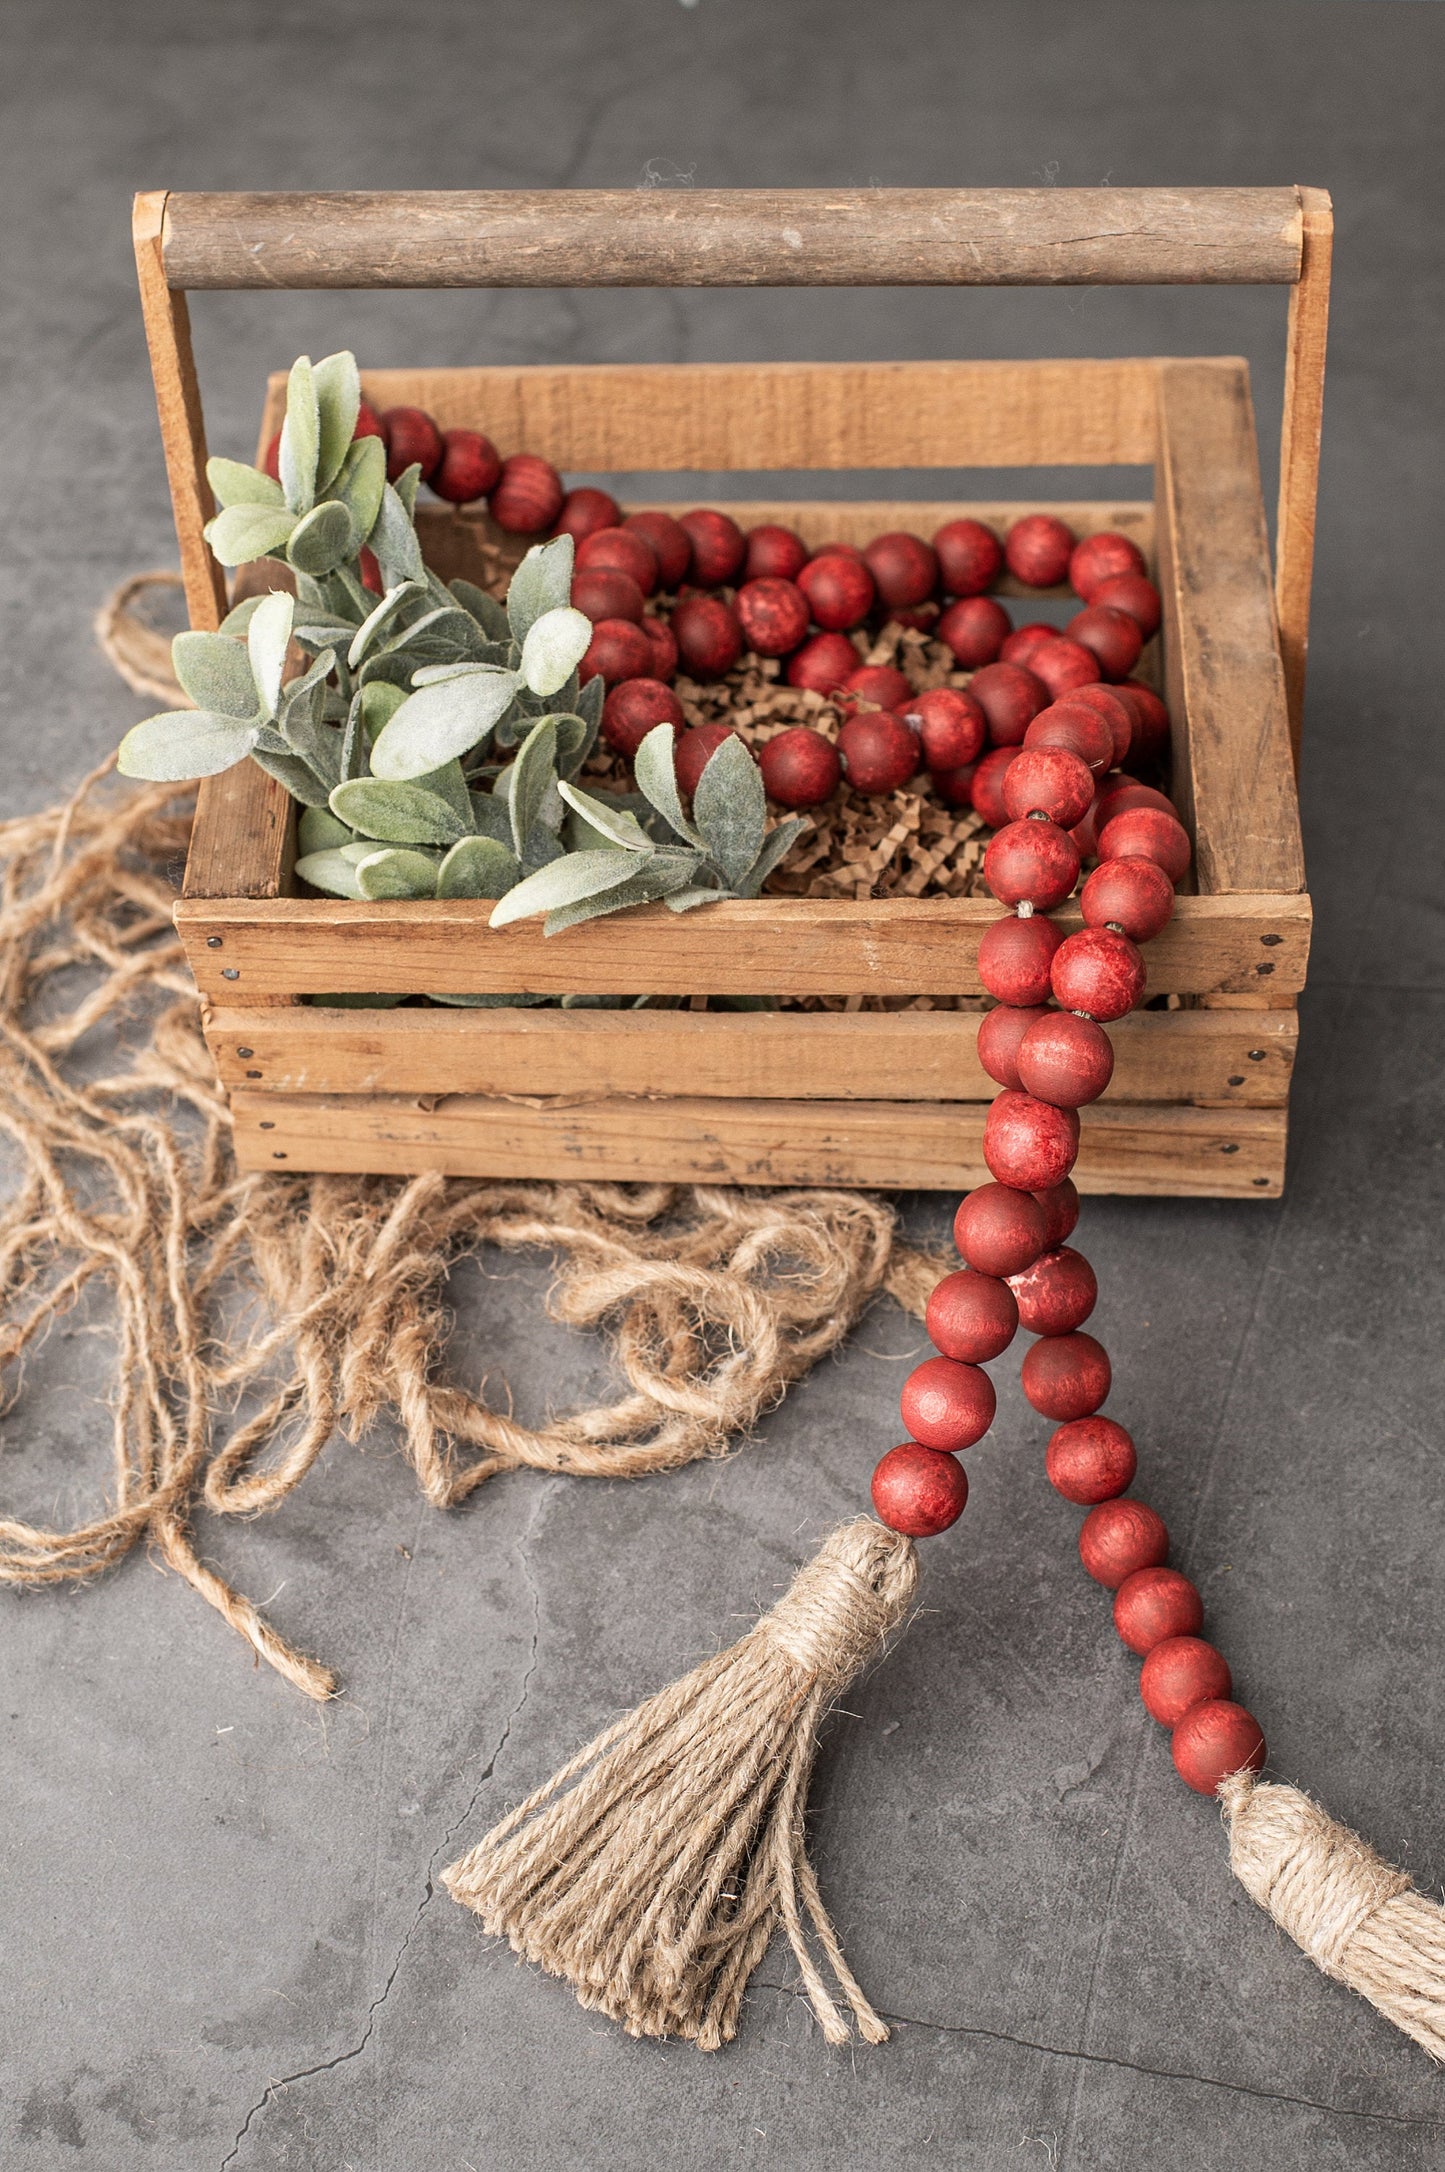 Red Wood Bead Garland with Tassels, Farmhouse Beads